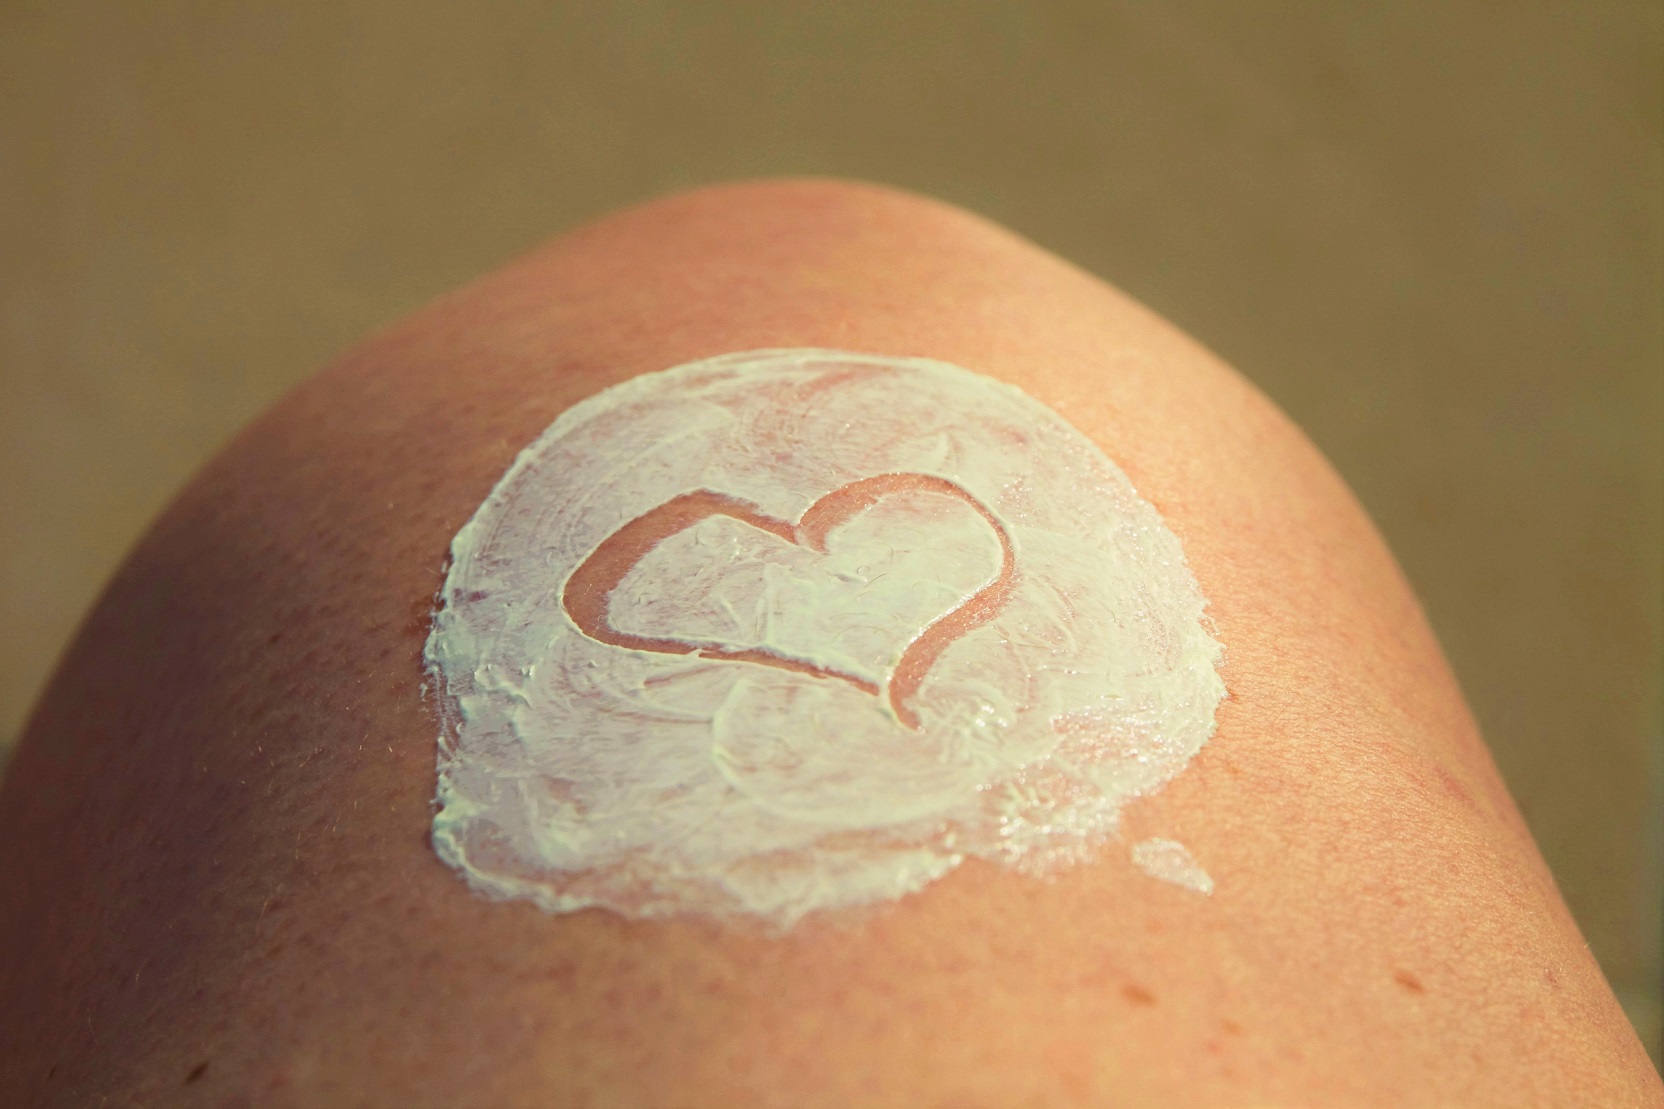 baby sunscreen buying guide for complete UVA and UVB protection